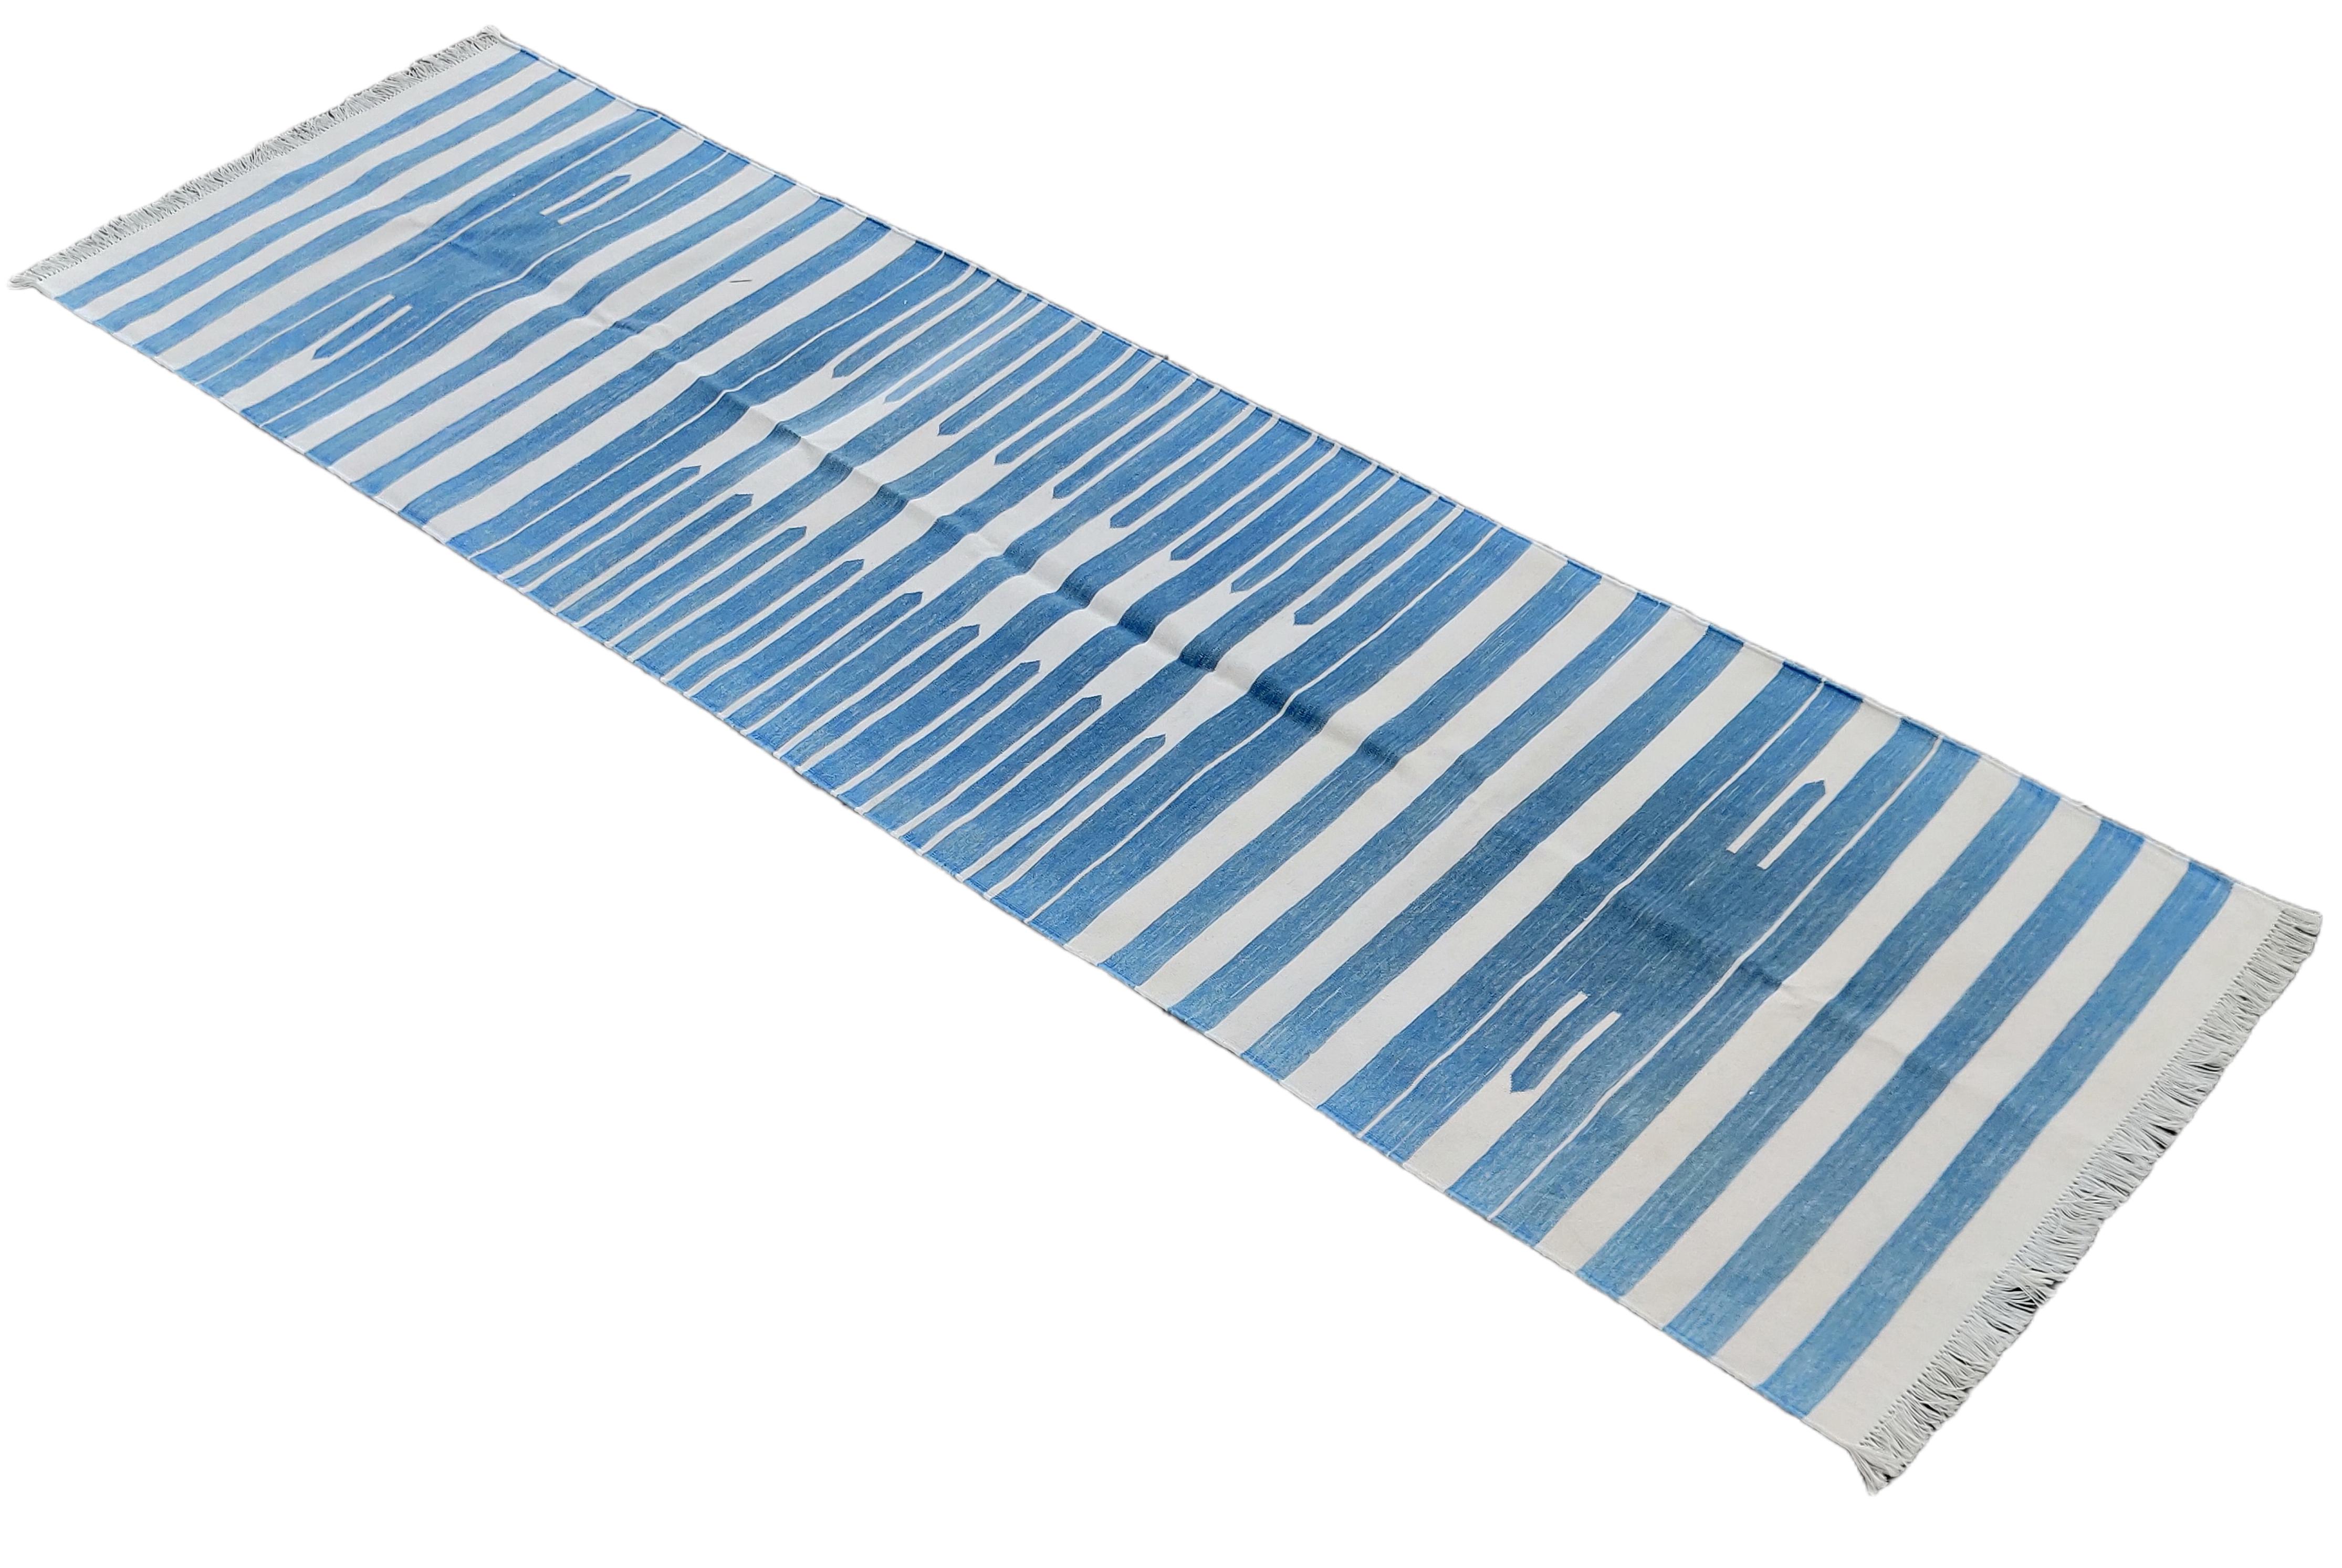 Cotton Natural Vegetable Dyed, Blue And White Striped Indian Dhurrie Runner-3'x10'
These special flat-weave dhurries are hand-woven with 15 ply 100% cotton yarn. Due to the special manufacturing techniques used to create our rugs, the size and color